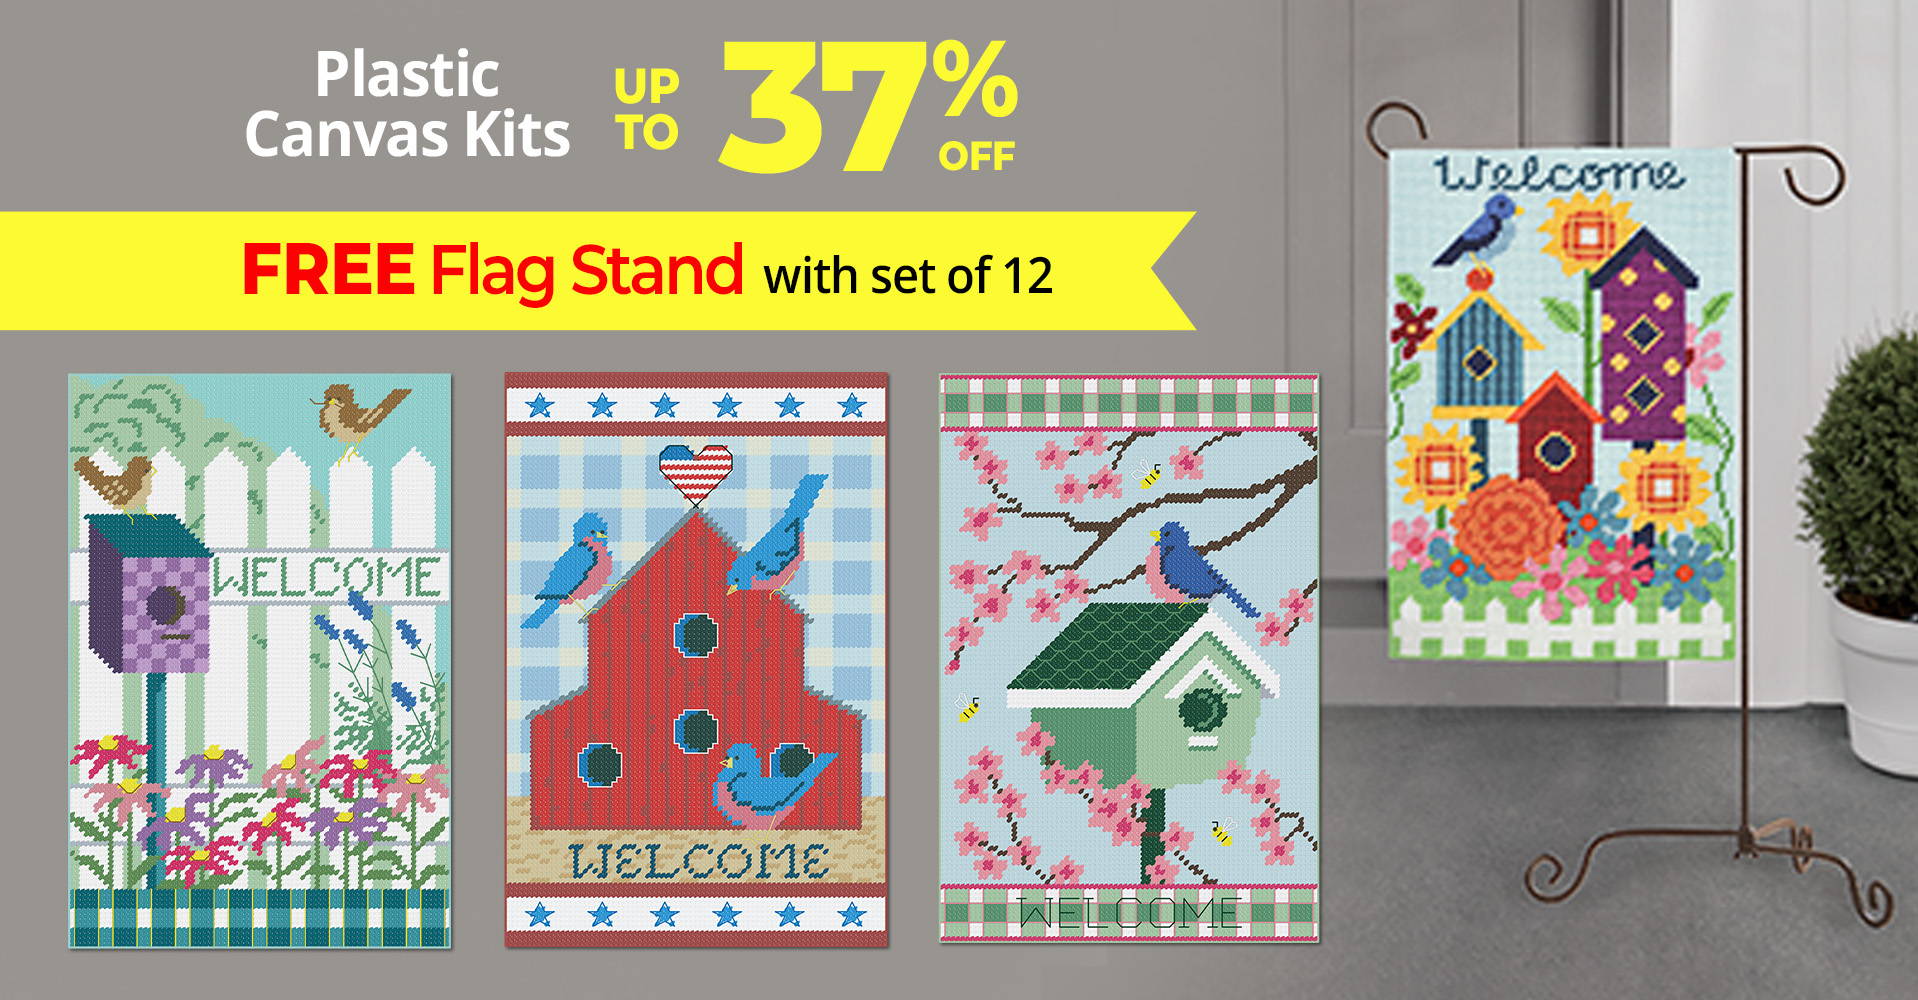 Text: Plastic Canvas Kits Up to 37% Off. Free Flag Stand with Set of 12. Image: 4 selections from Herrschners Birdhouse Flags & Hanger Kits.